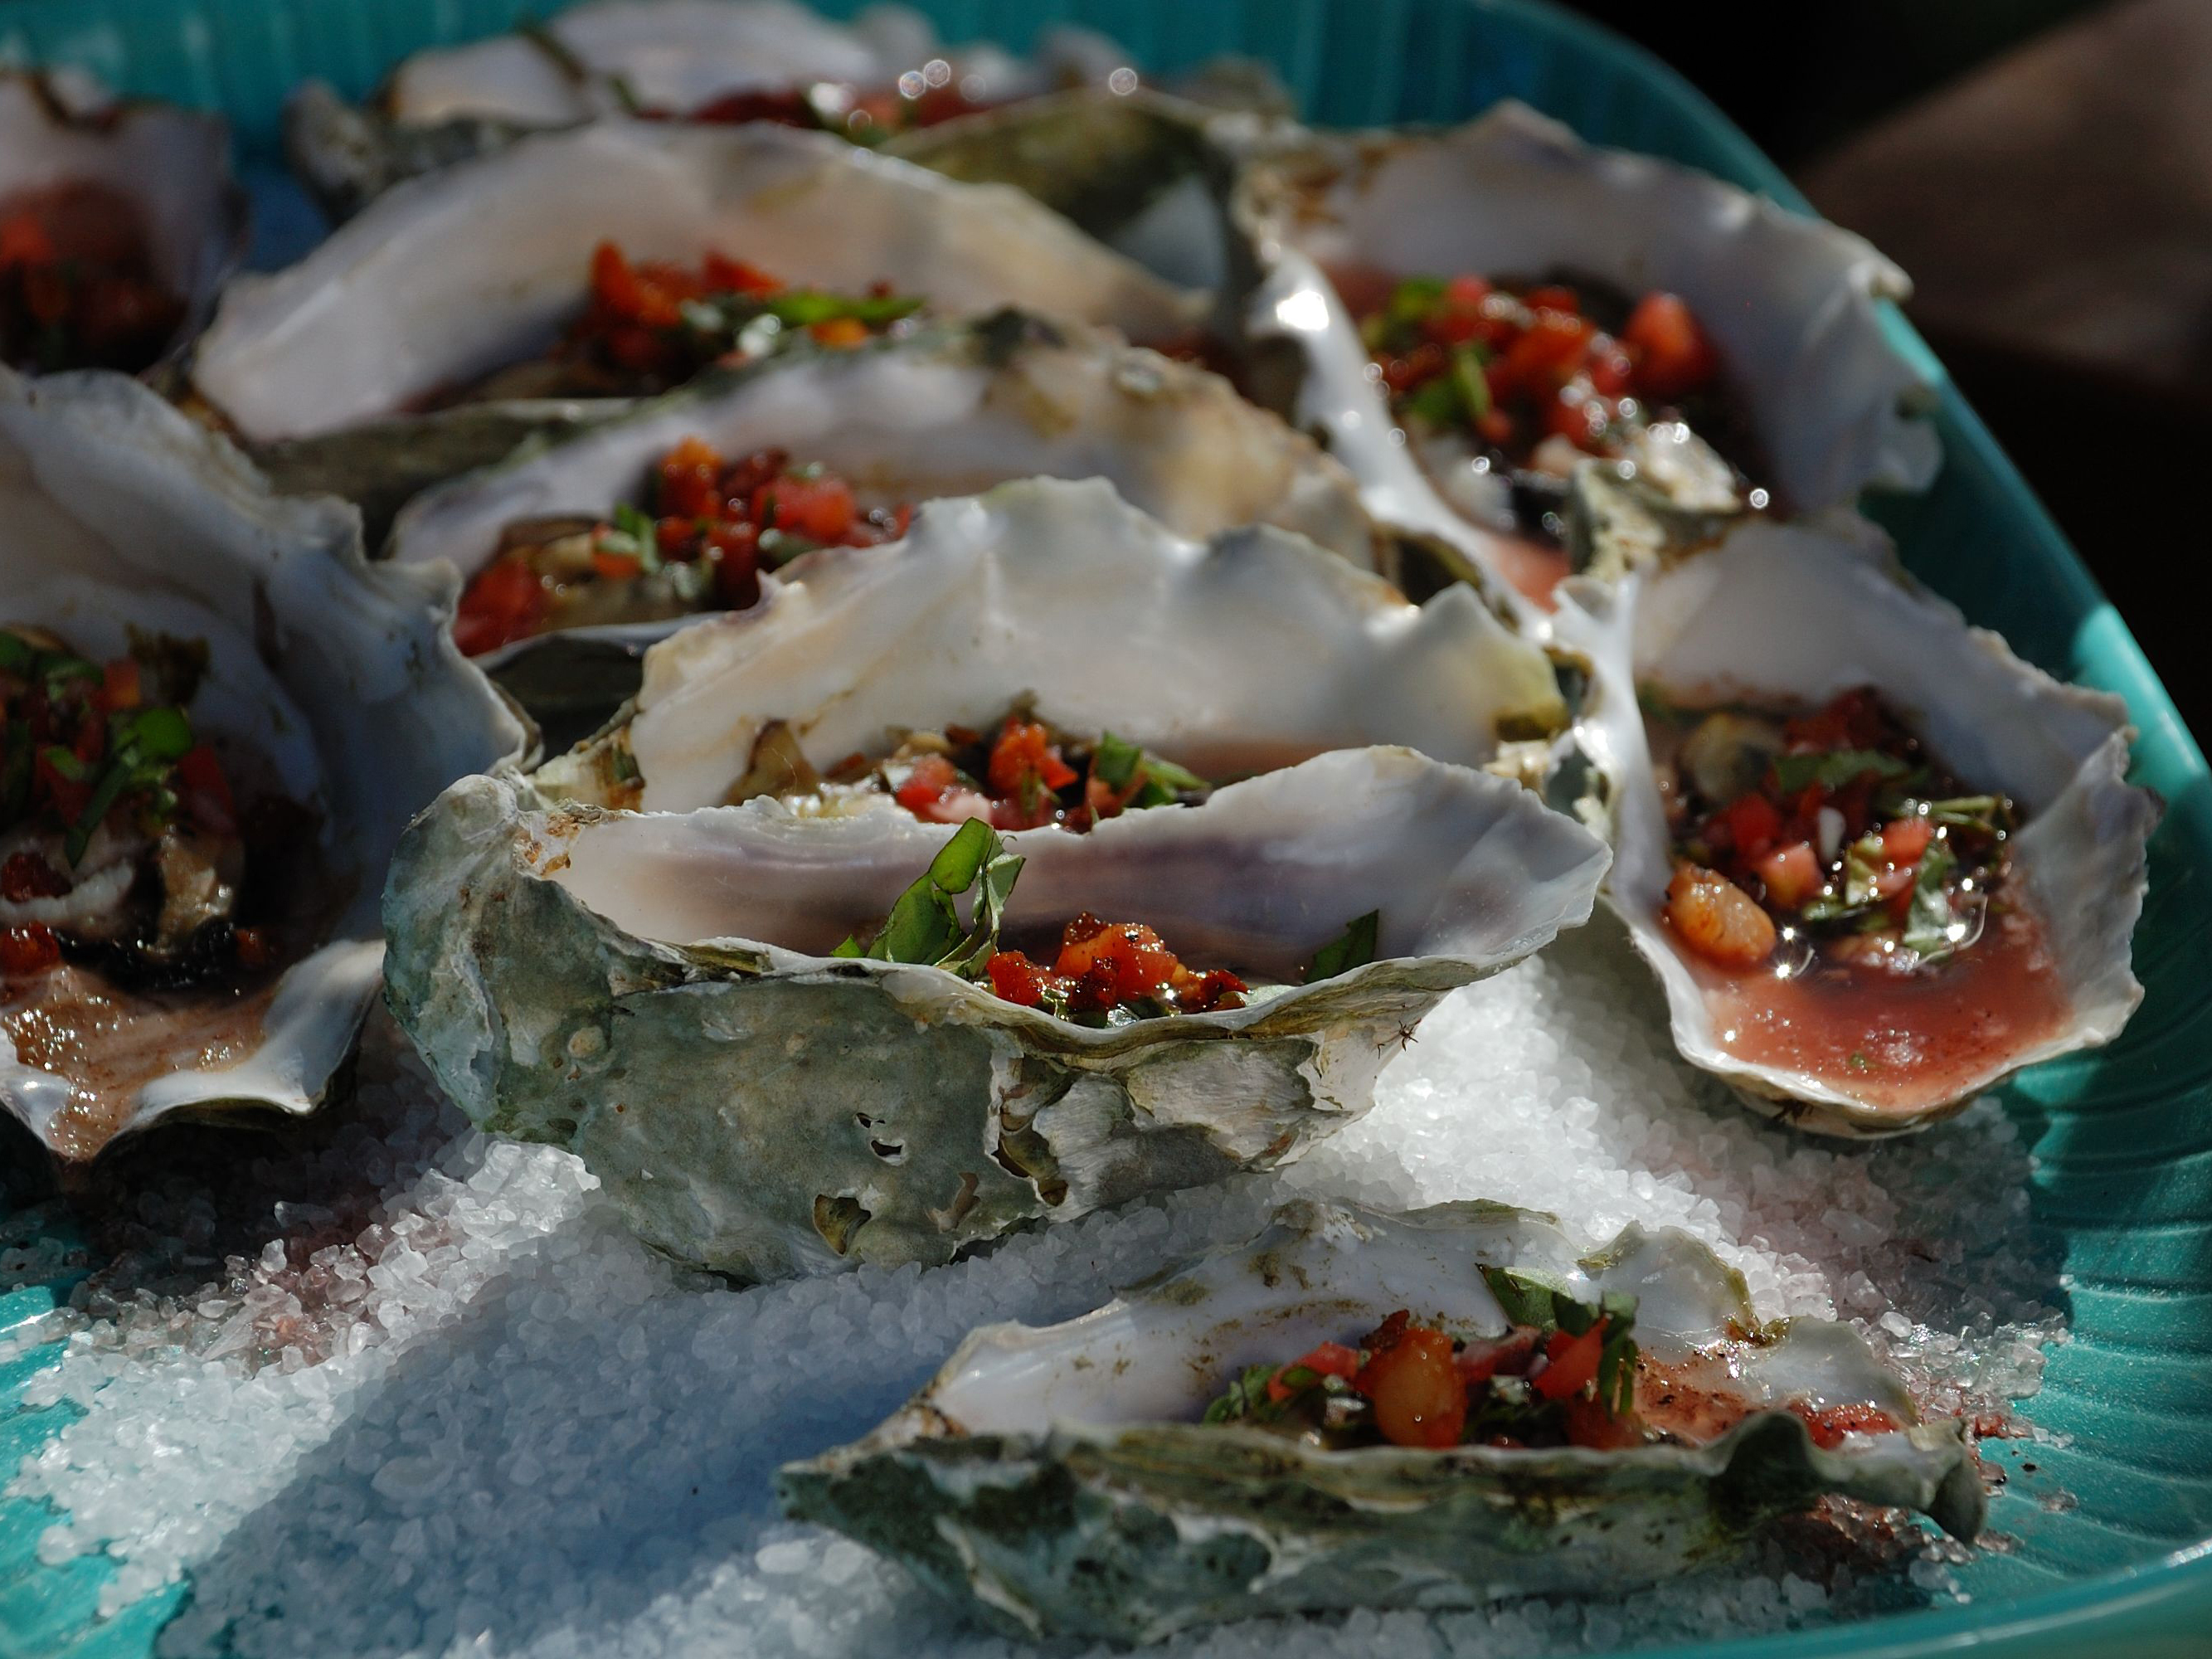 https://www.foodnetwork.com/content/dam/images/food/fullset/2012/2/7/0/QF0102_wood-grilled-oysters-02_s4x3.jpg